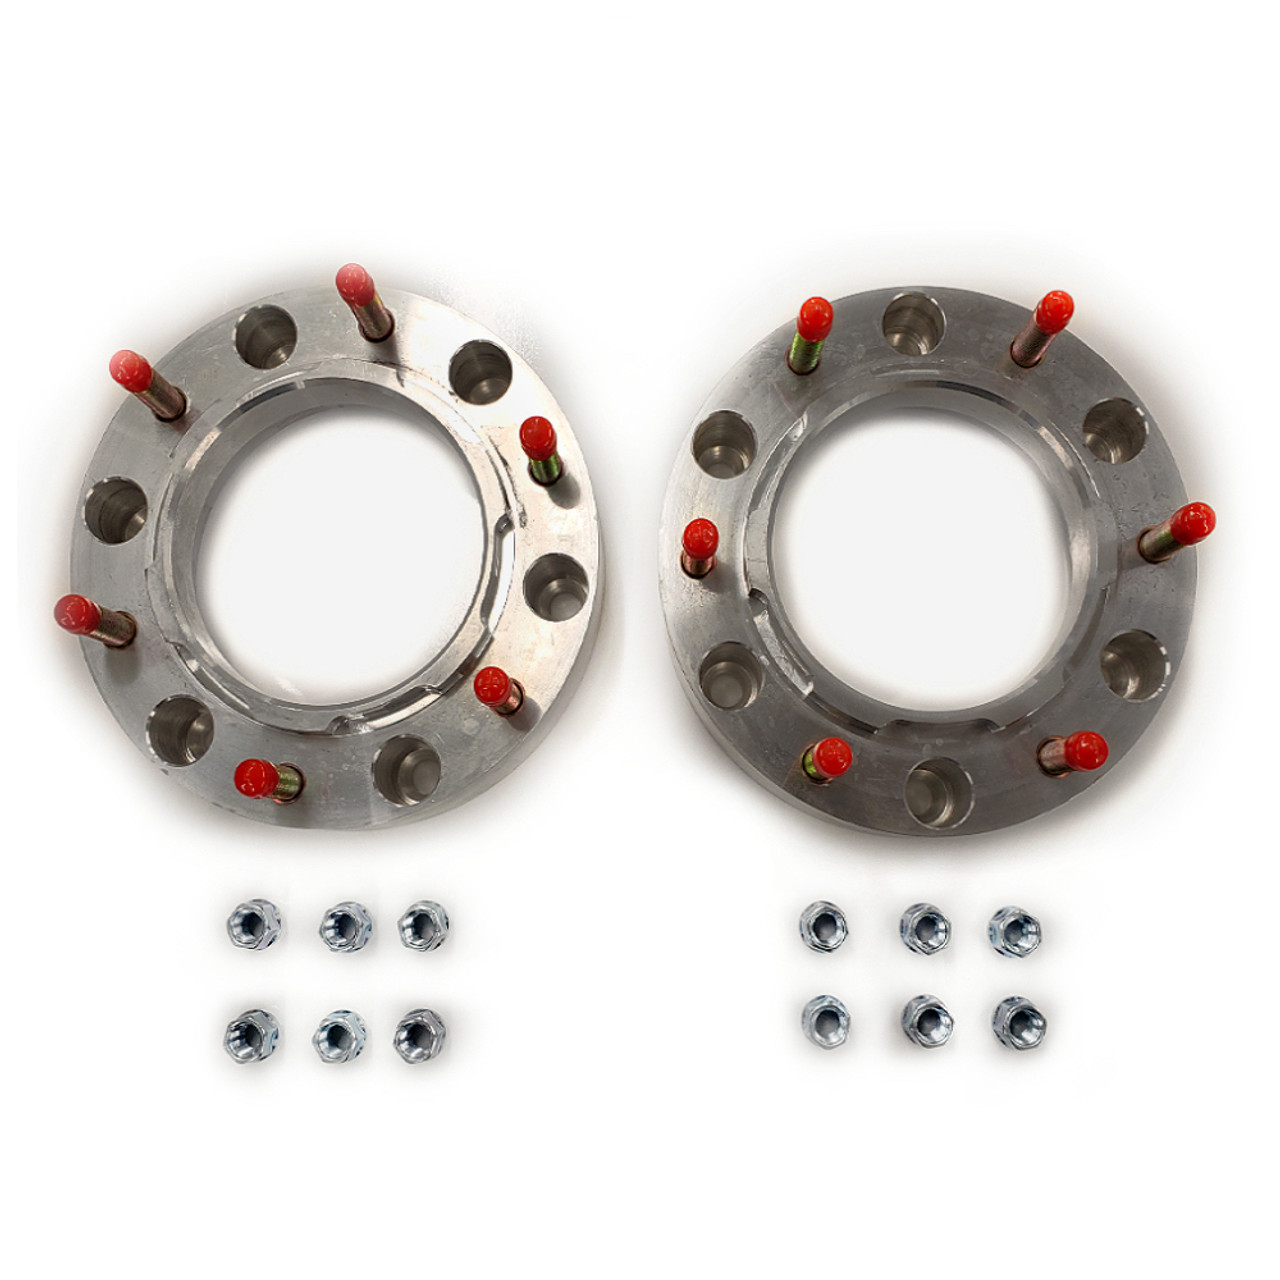 Rear Wheel Spacers for Sprinter 3500 2 RTS-2000